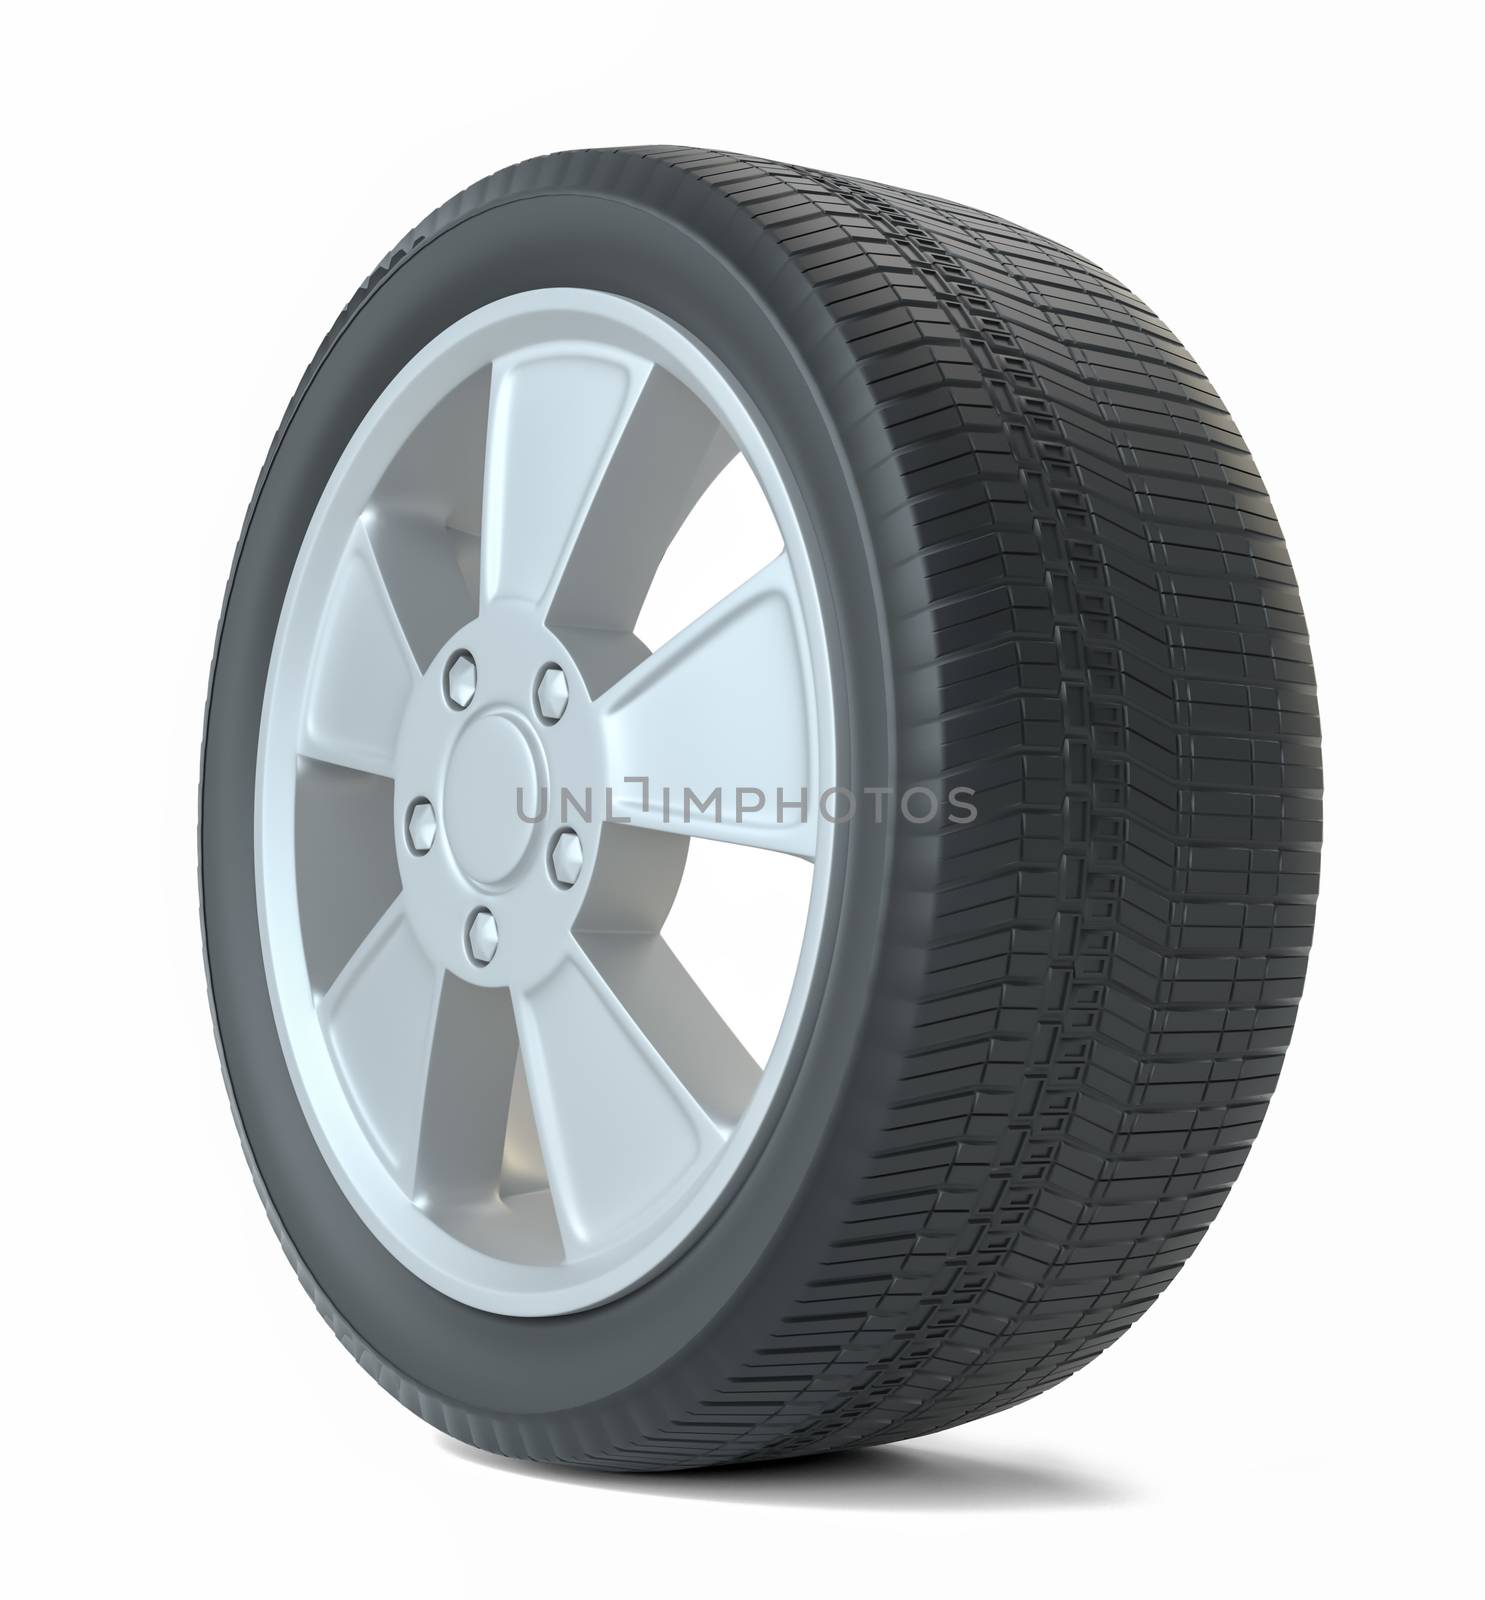 High Quality Car Wheel, Isolated on White Background. 3D Rendering